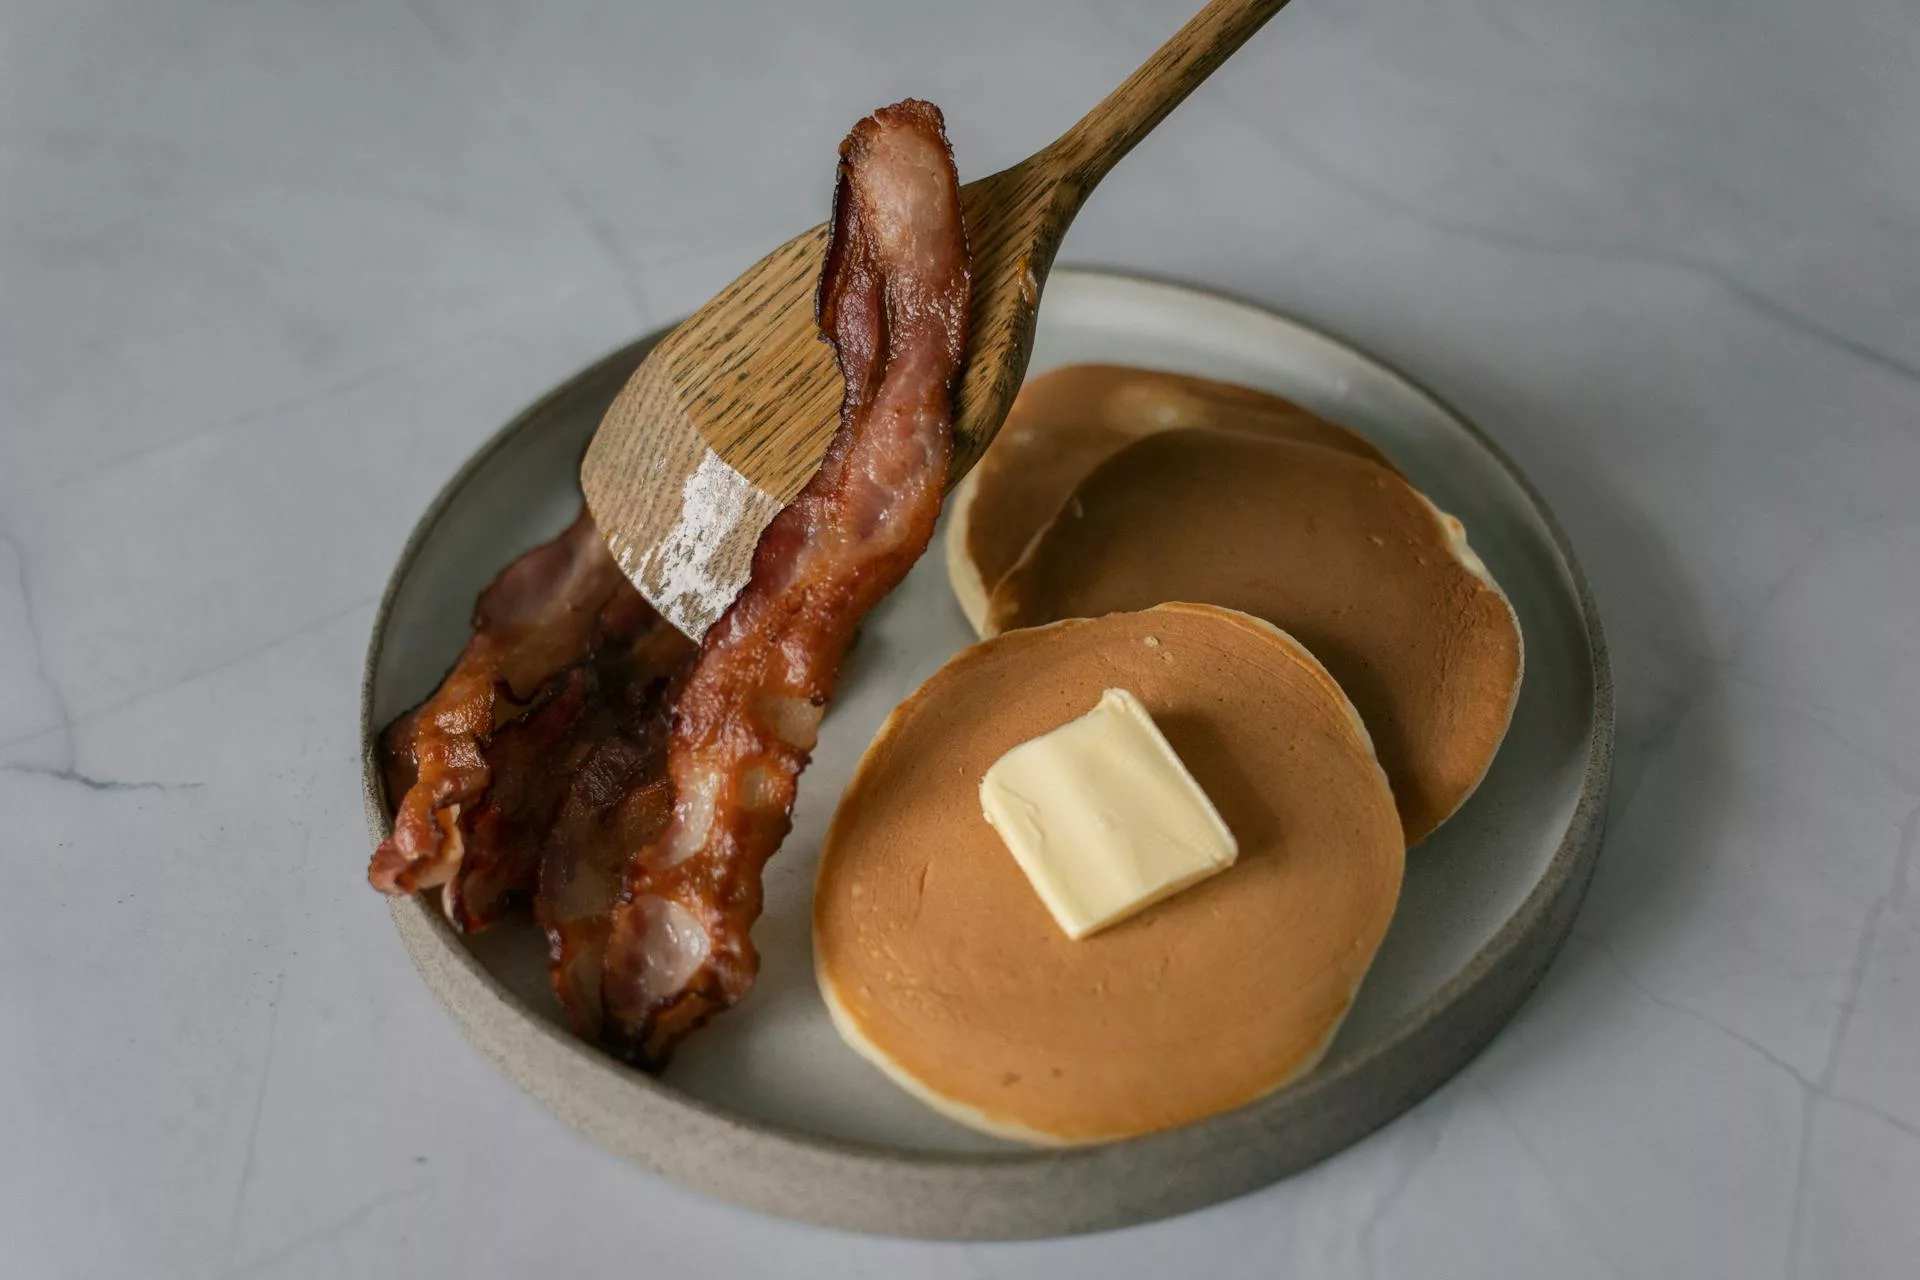 Plate of Pancakes with Butter and Bacon